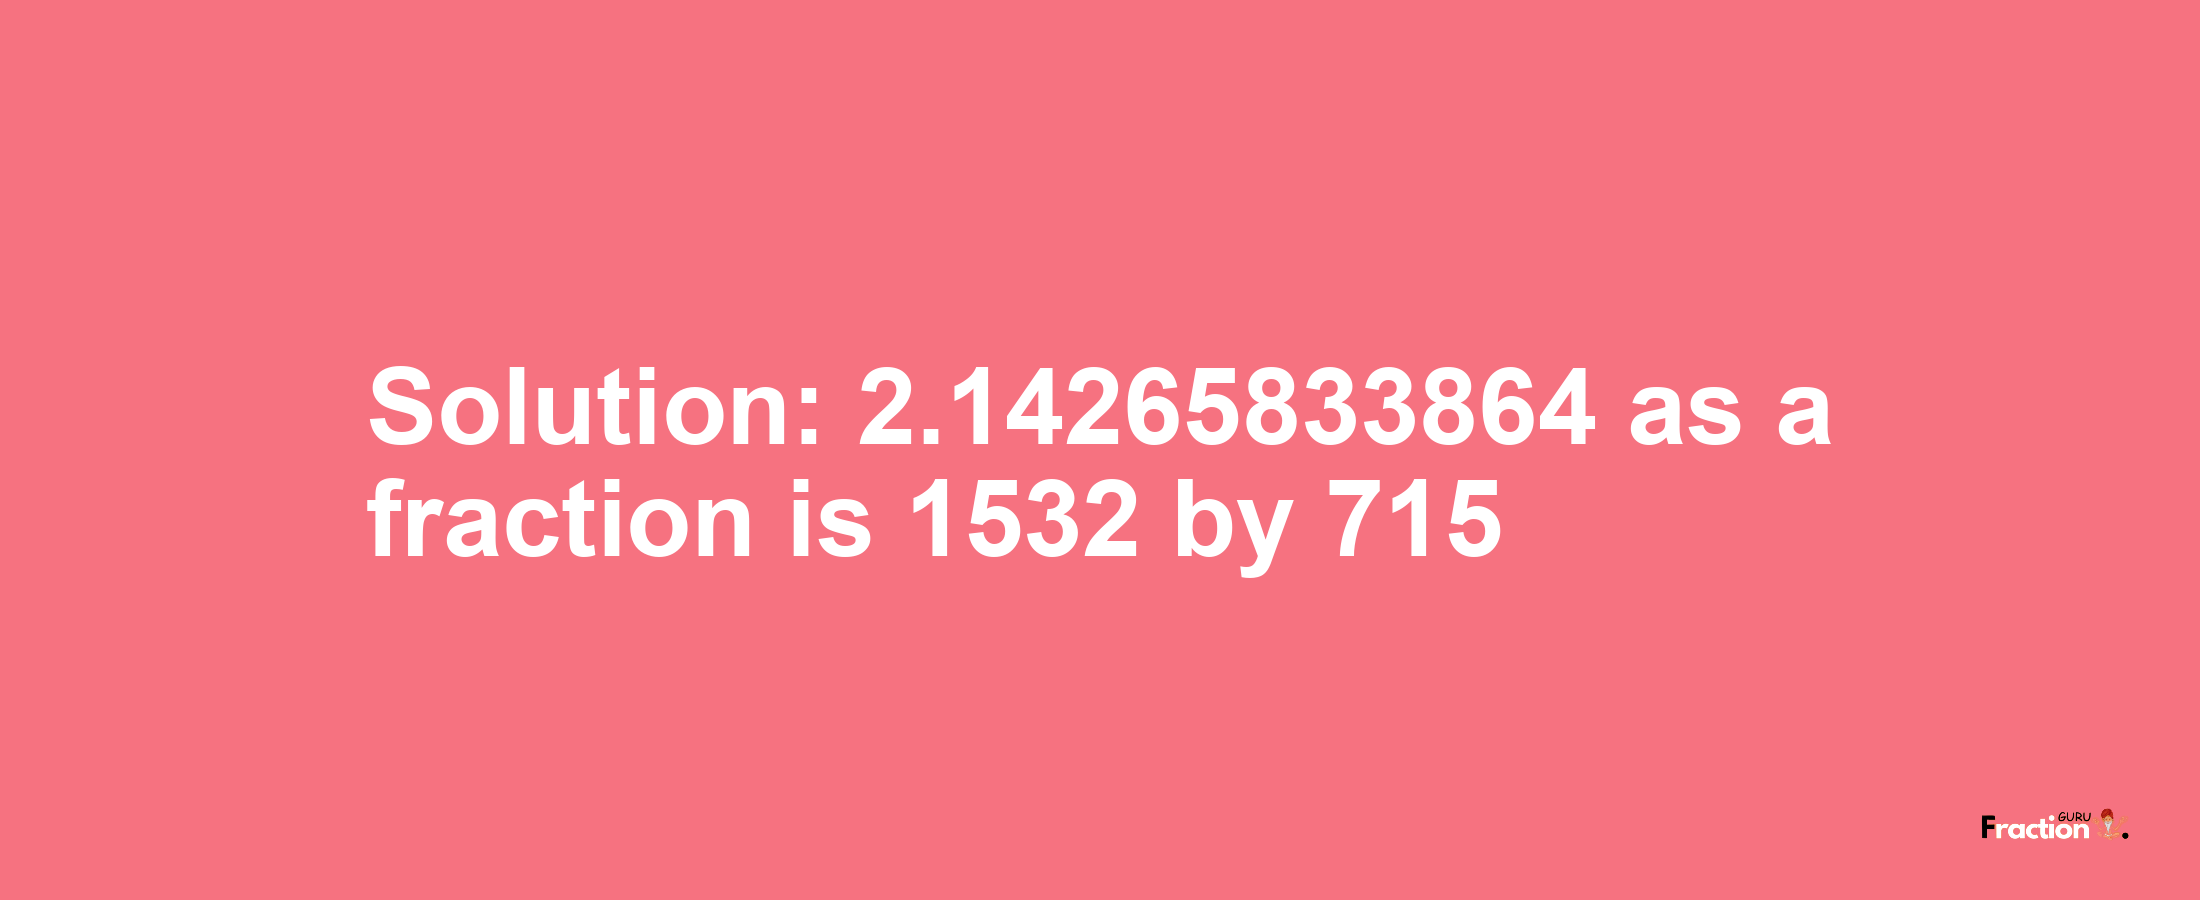 Solution:2.14265833864 as a fraction is 1532/715